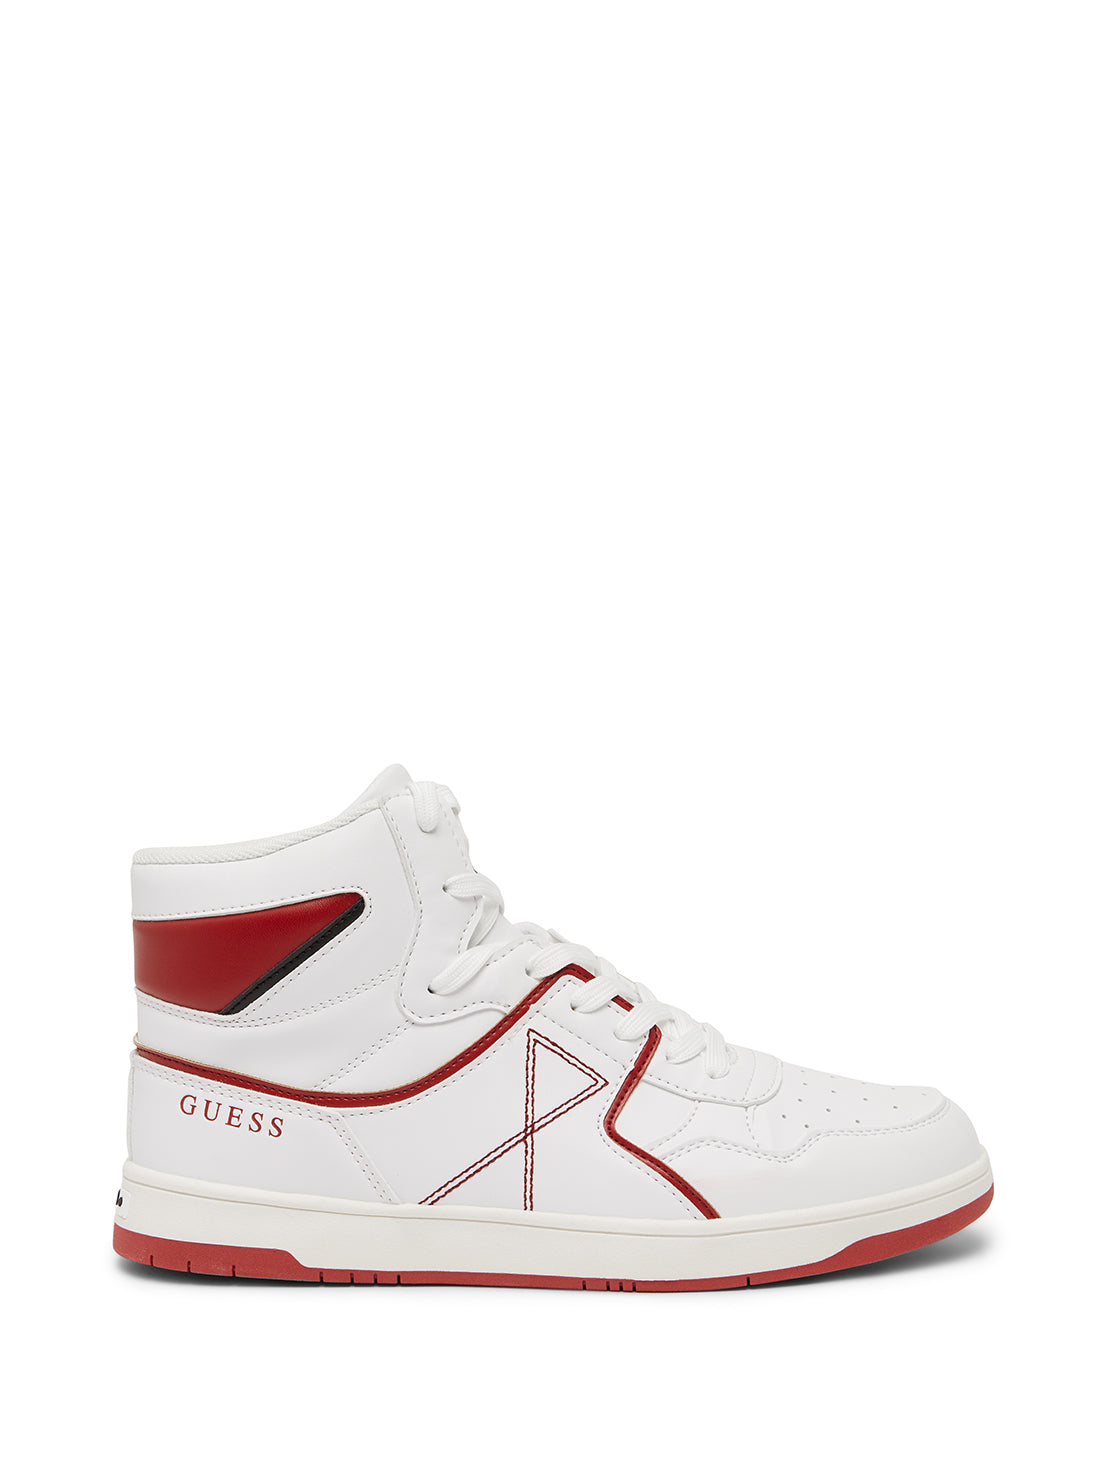 GUESS Men's Red White Fidal High Top Sneakers FIDAL Side View